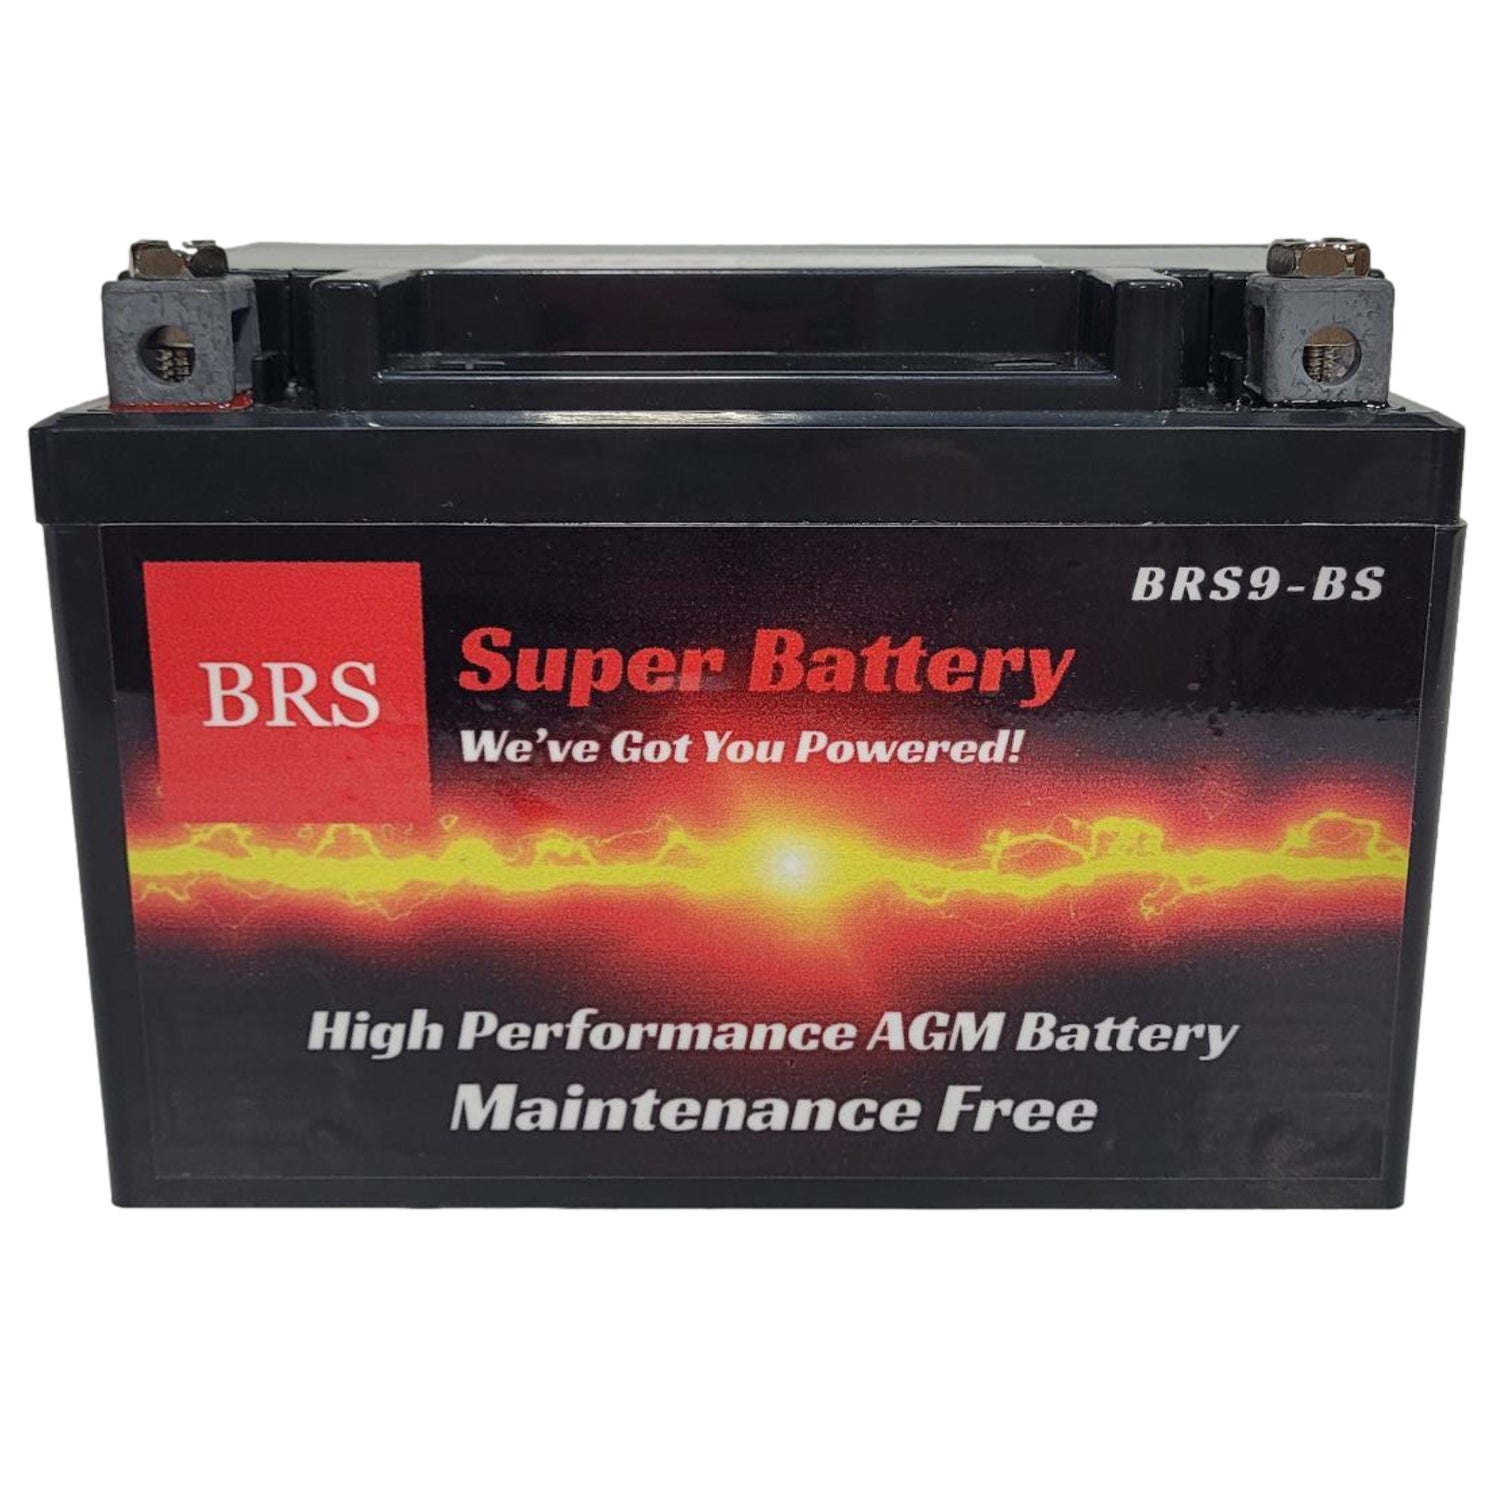 WPX9-BS 12v High Performance Sealed AGM PowerSport 10 Year Battery - BRS Super Battery